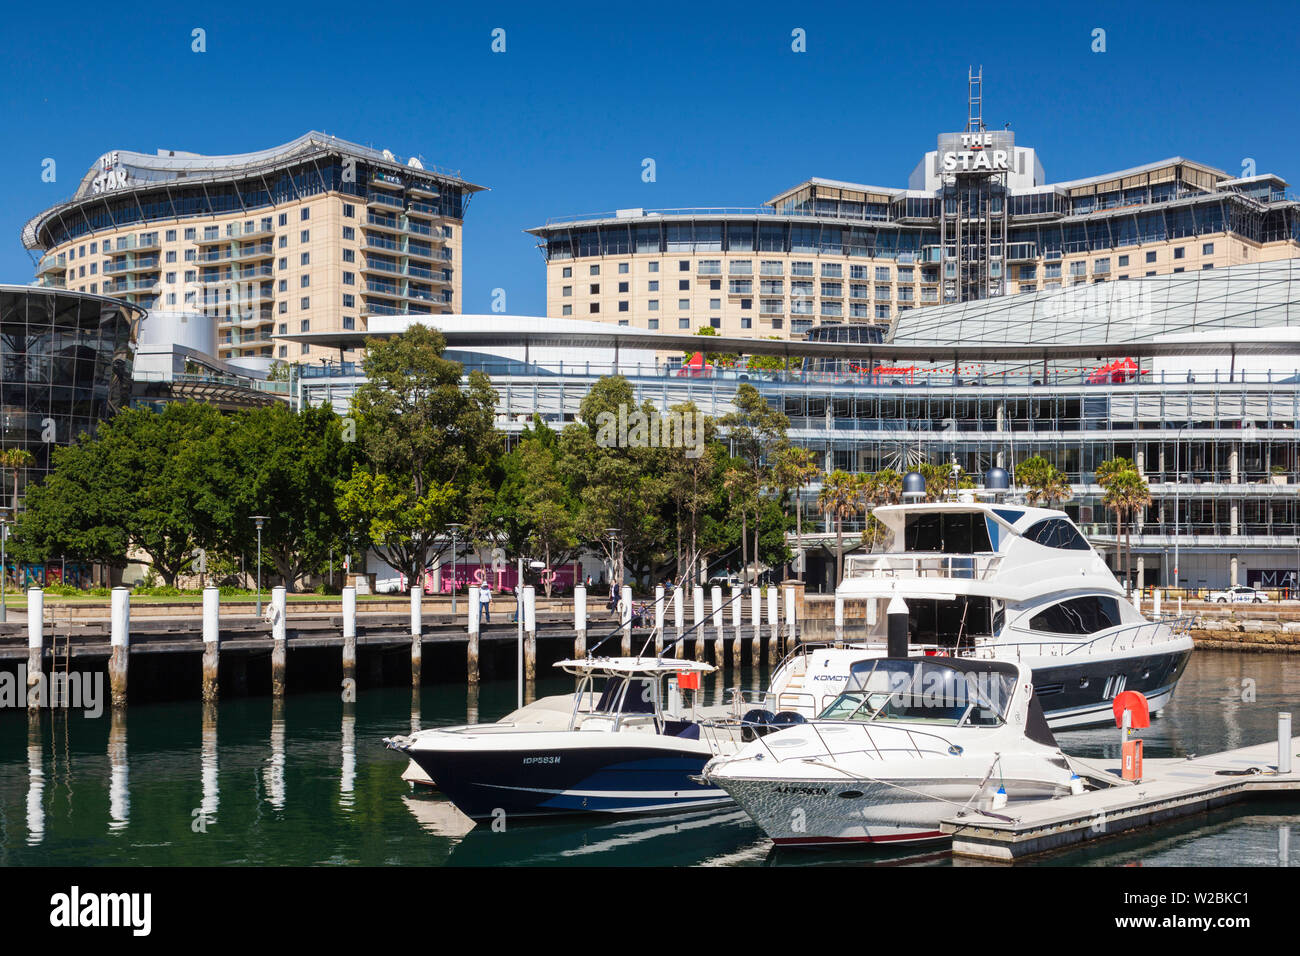 Australia, New South Wales, NSW, Sydney, The Star Casino and Hotel, exterior Stock Photo